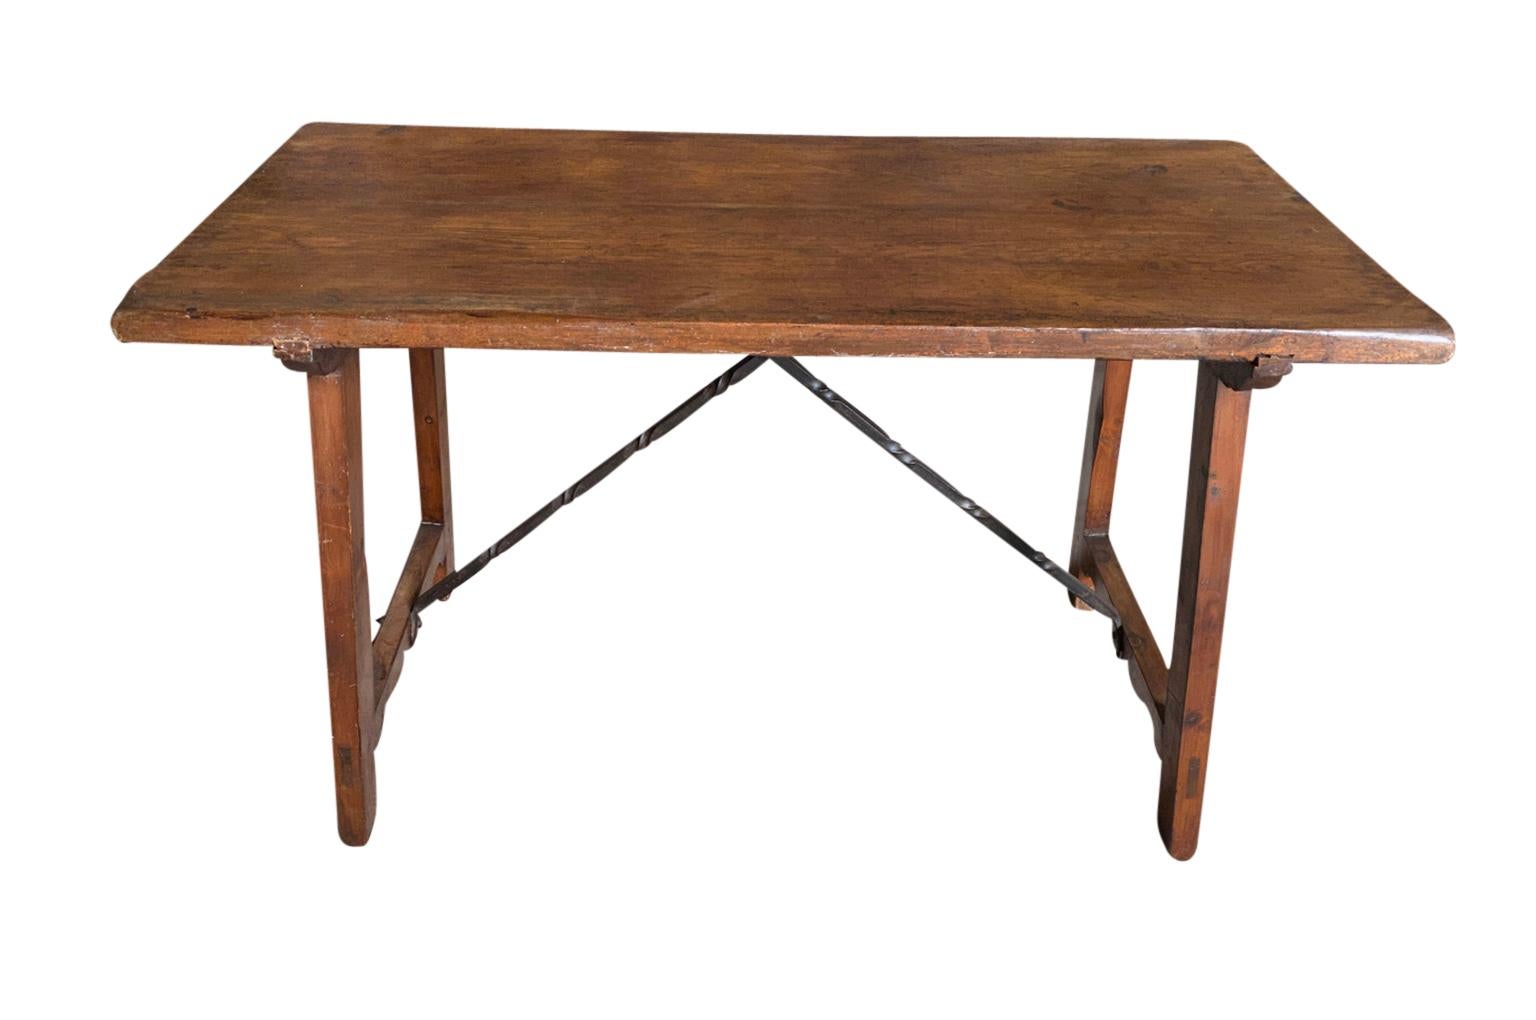 A very handsome 19th century Console Table - Side Table from the Catalan region of Spain.  Wonderfully constructed from richly stained pine and hand forged stretchers.  Terrific patina - warm & luminous.  Very chic minimalist design.